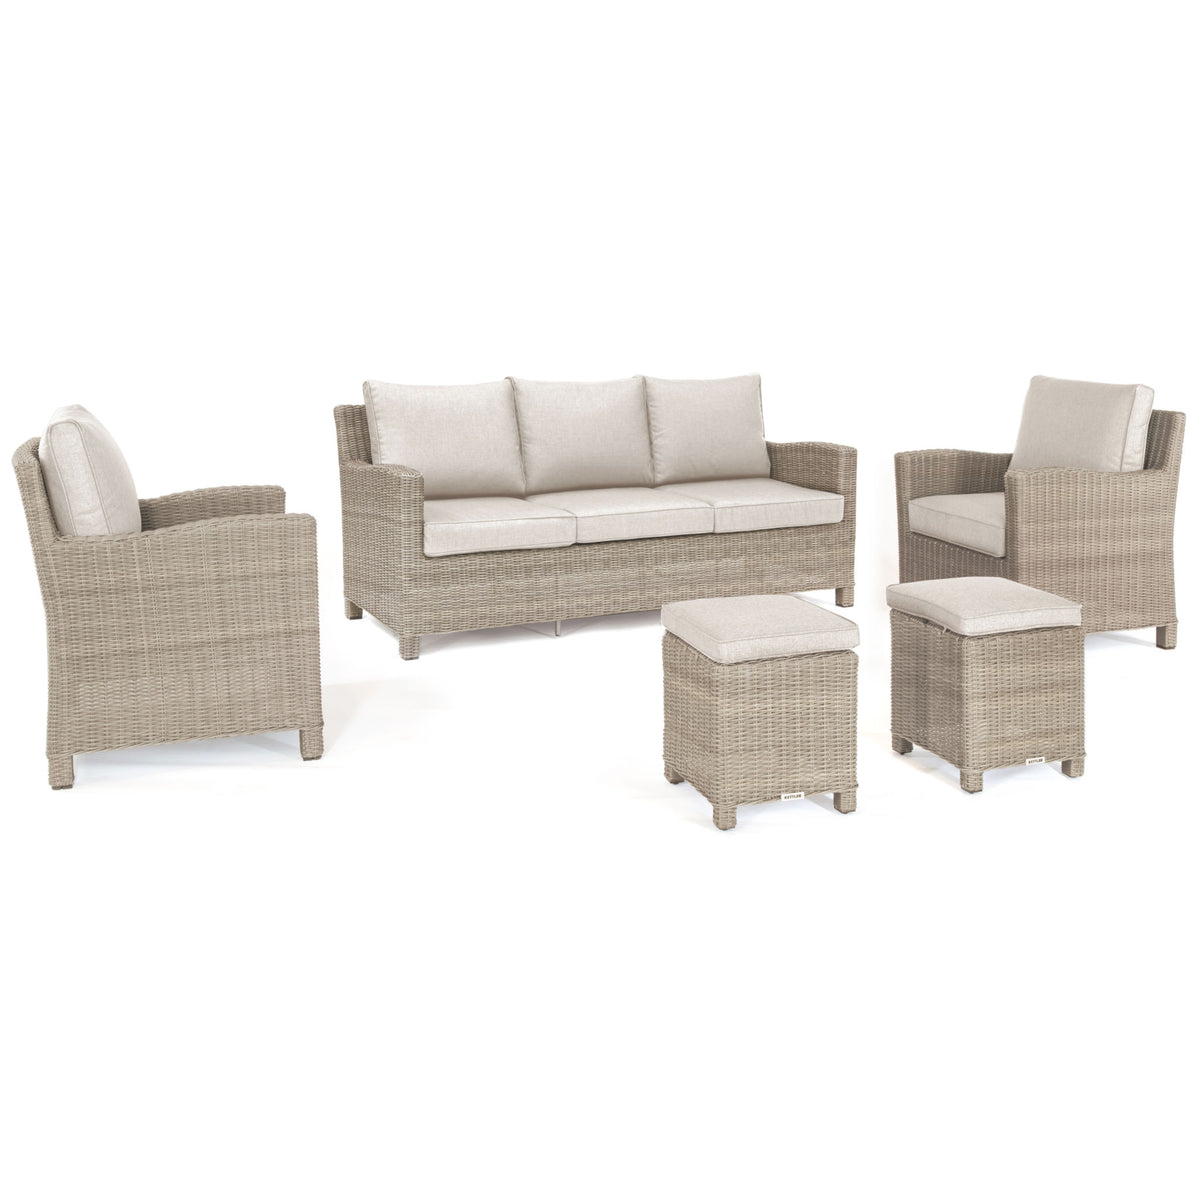 Kettler Palma Signature Oyster Wicker Outdoor Casual Dining Lounge Sofa Set